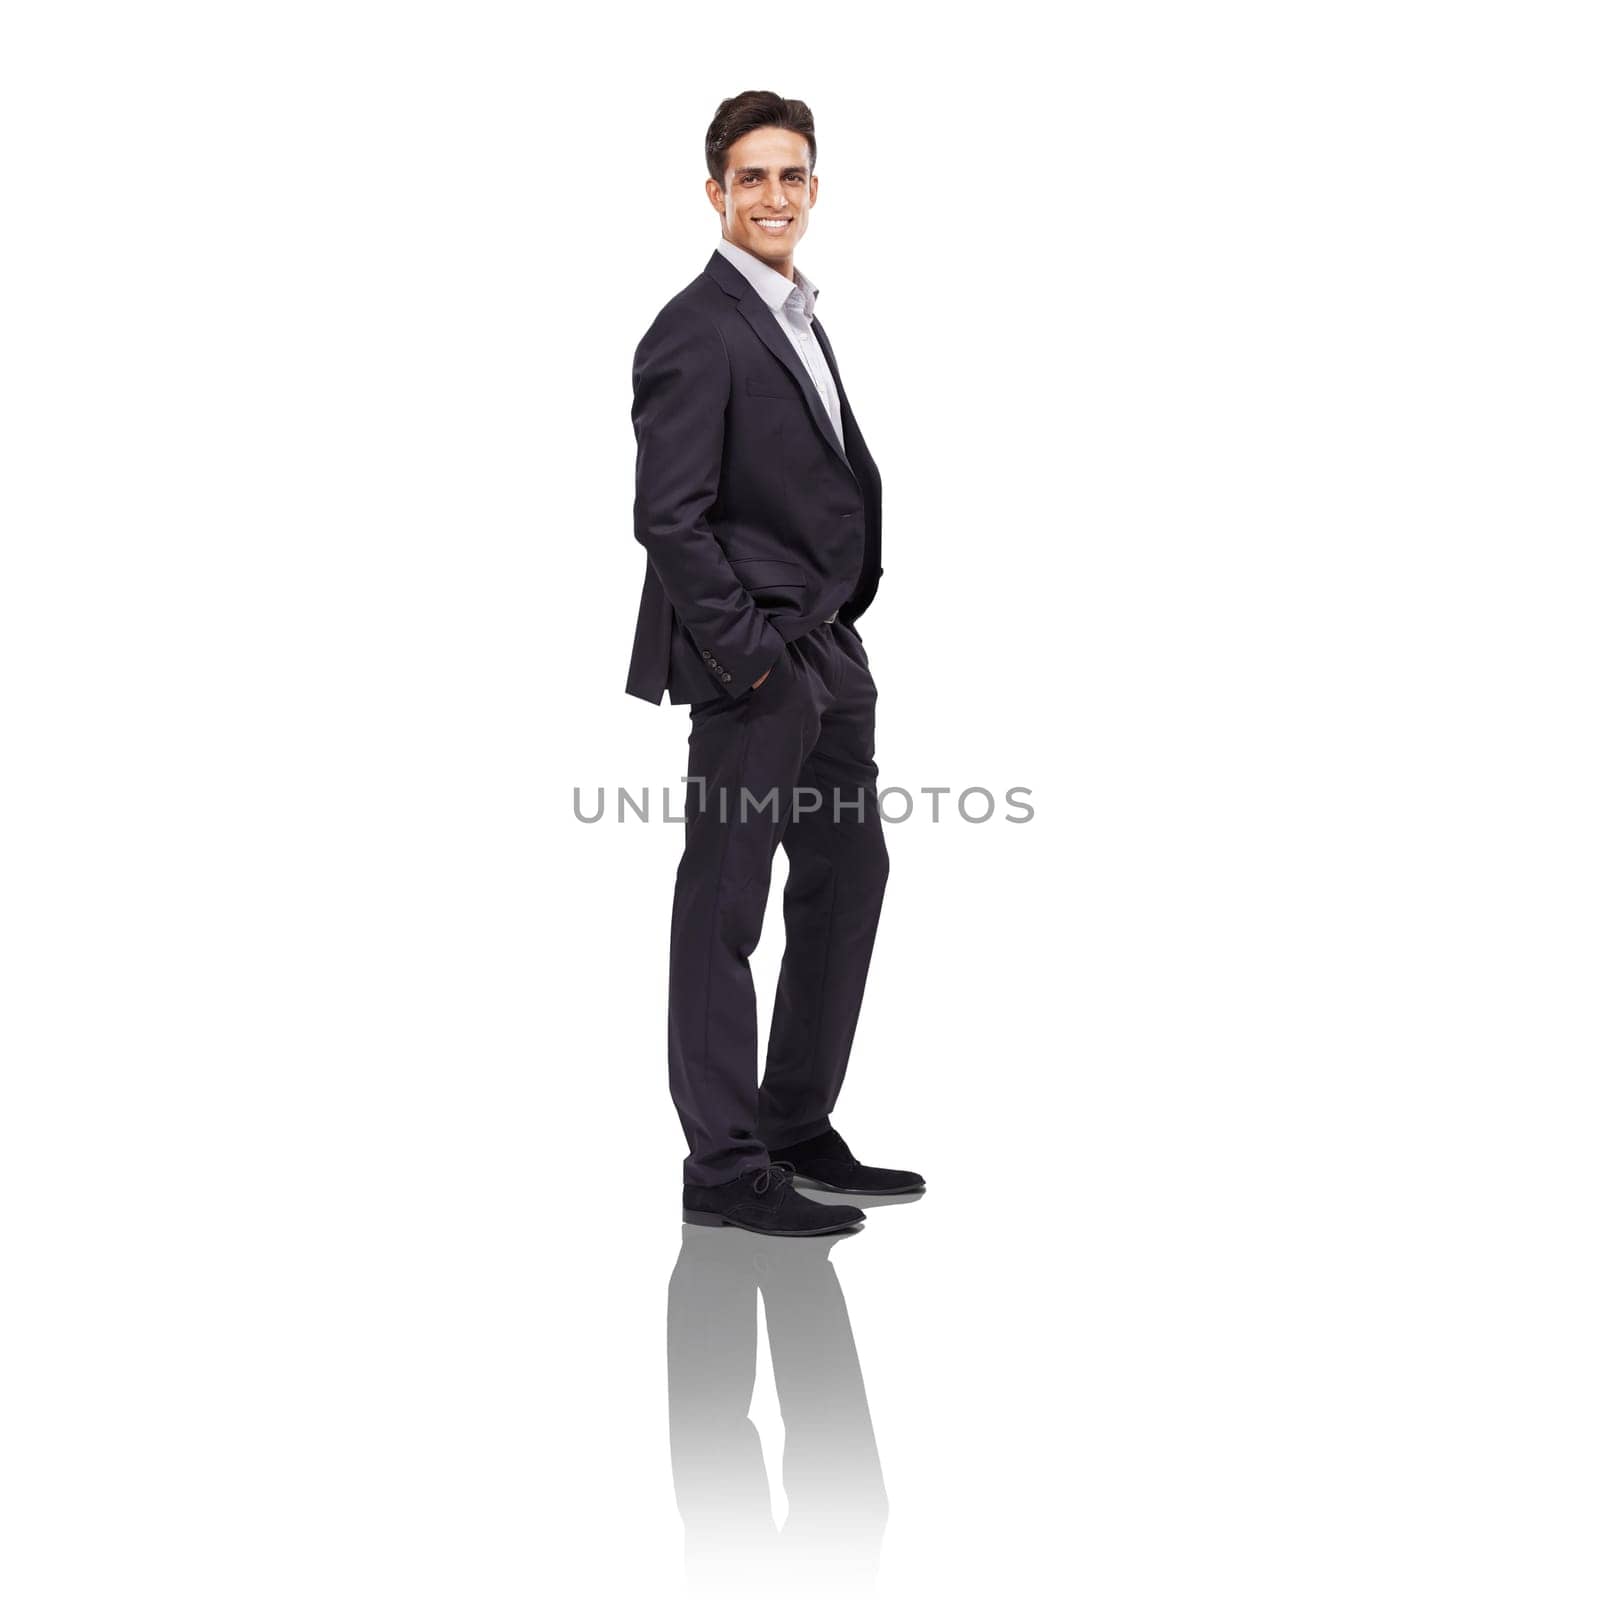 Suit, corporate fashion for business and an Indian man looking confident and professional on a png, transparent and isolated or mockup background. Portrait of a handsome executive or CEO.